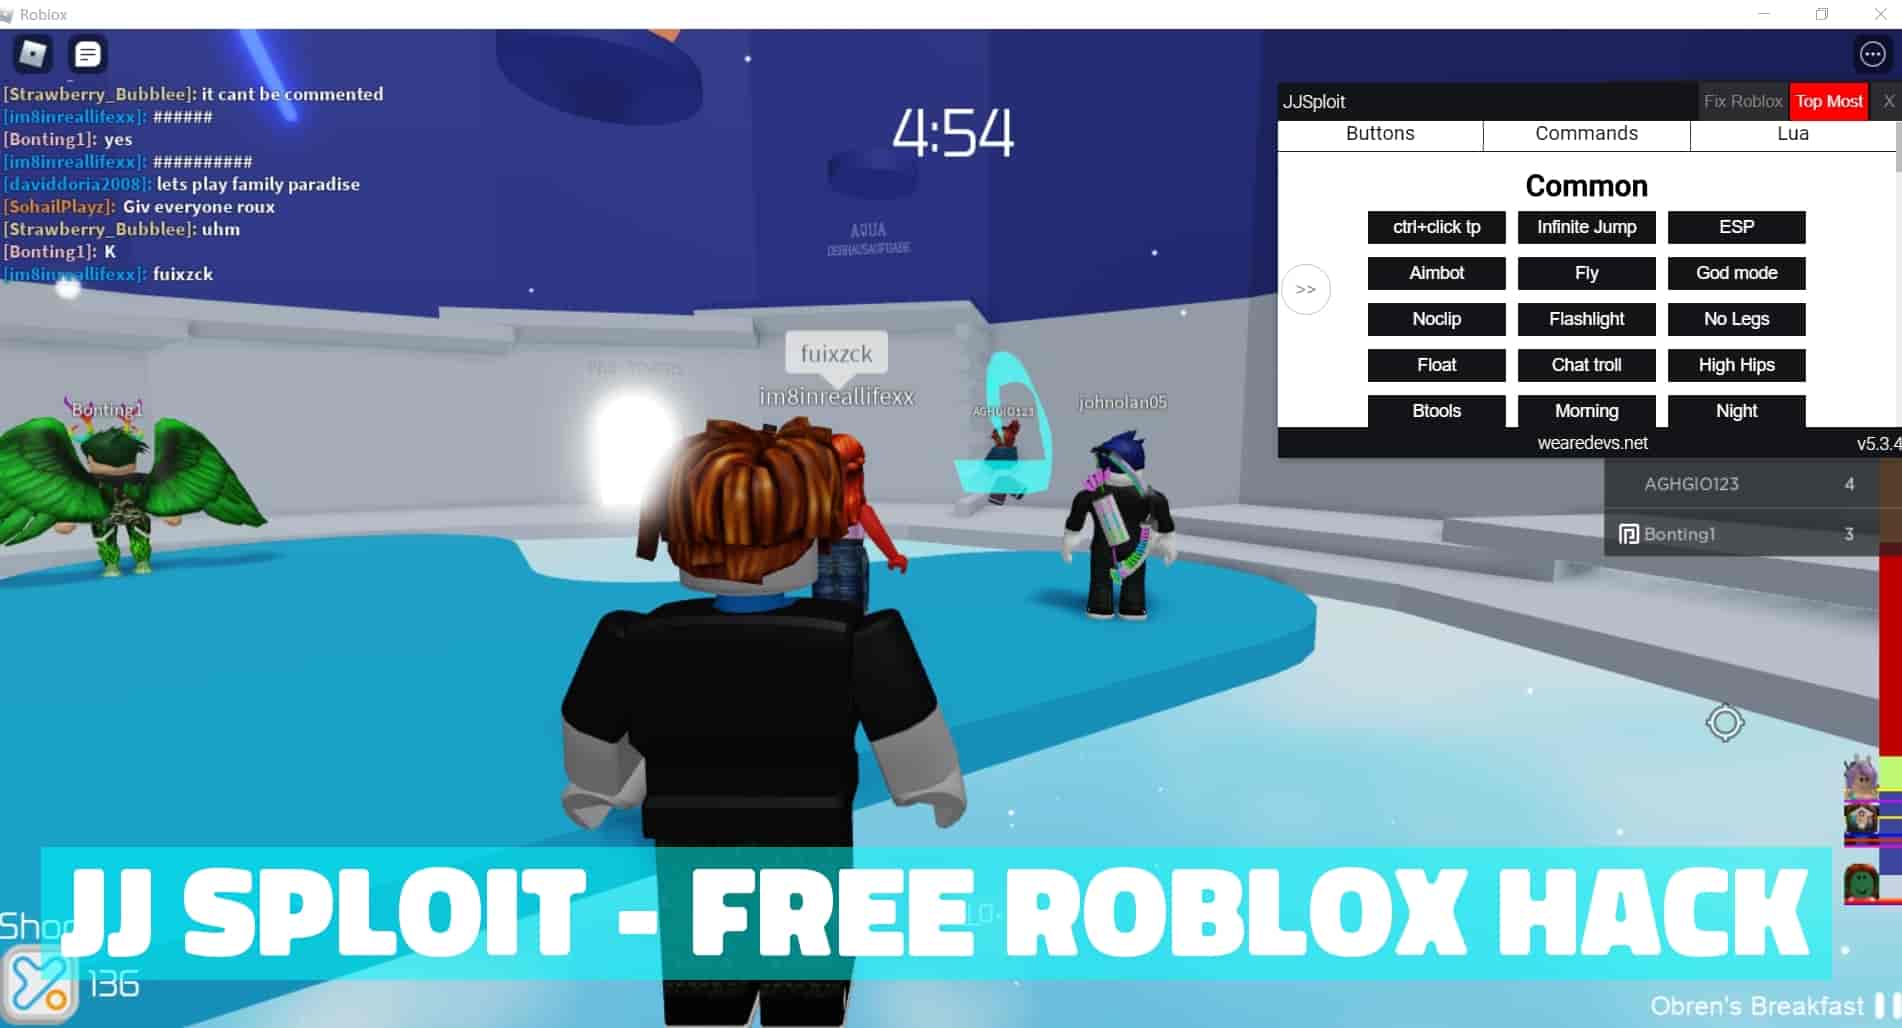 Latest Jjsploit Roblox Free Hacks Working Exploit For Roblox Undetected Gaming Aspect - roblox hack jjsploit